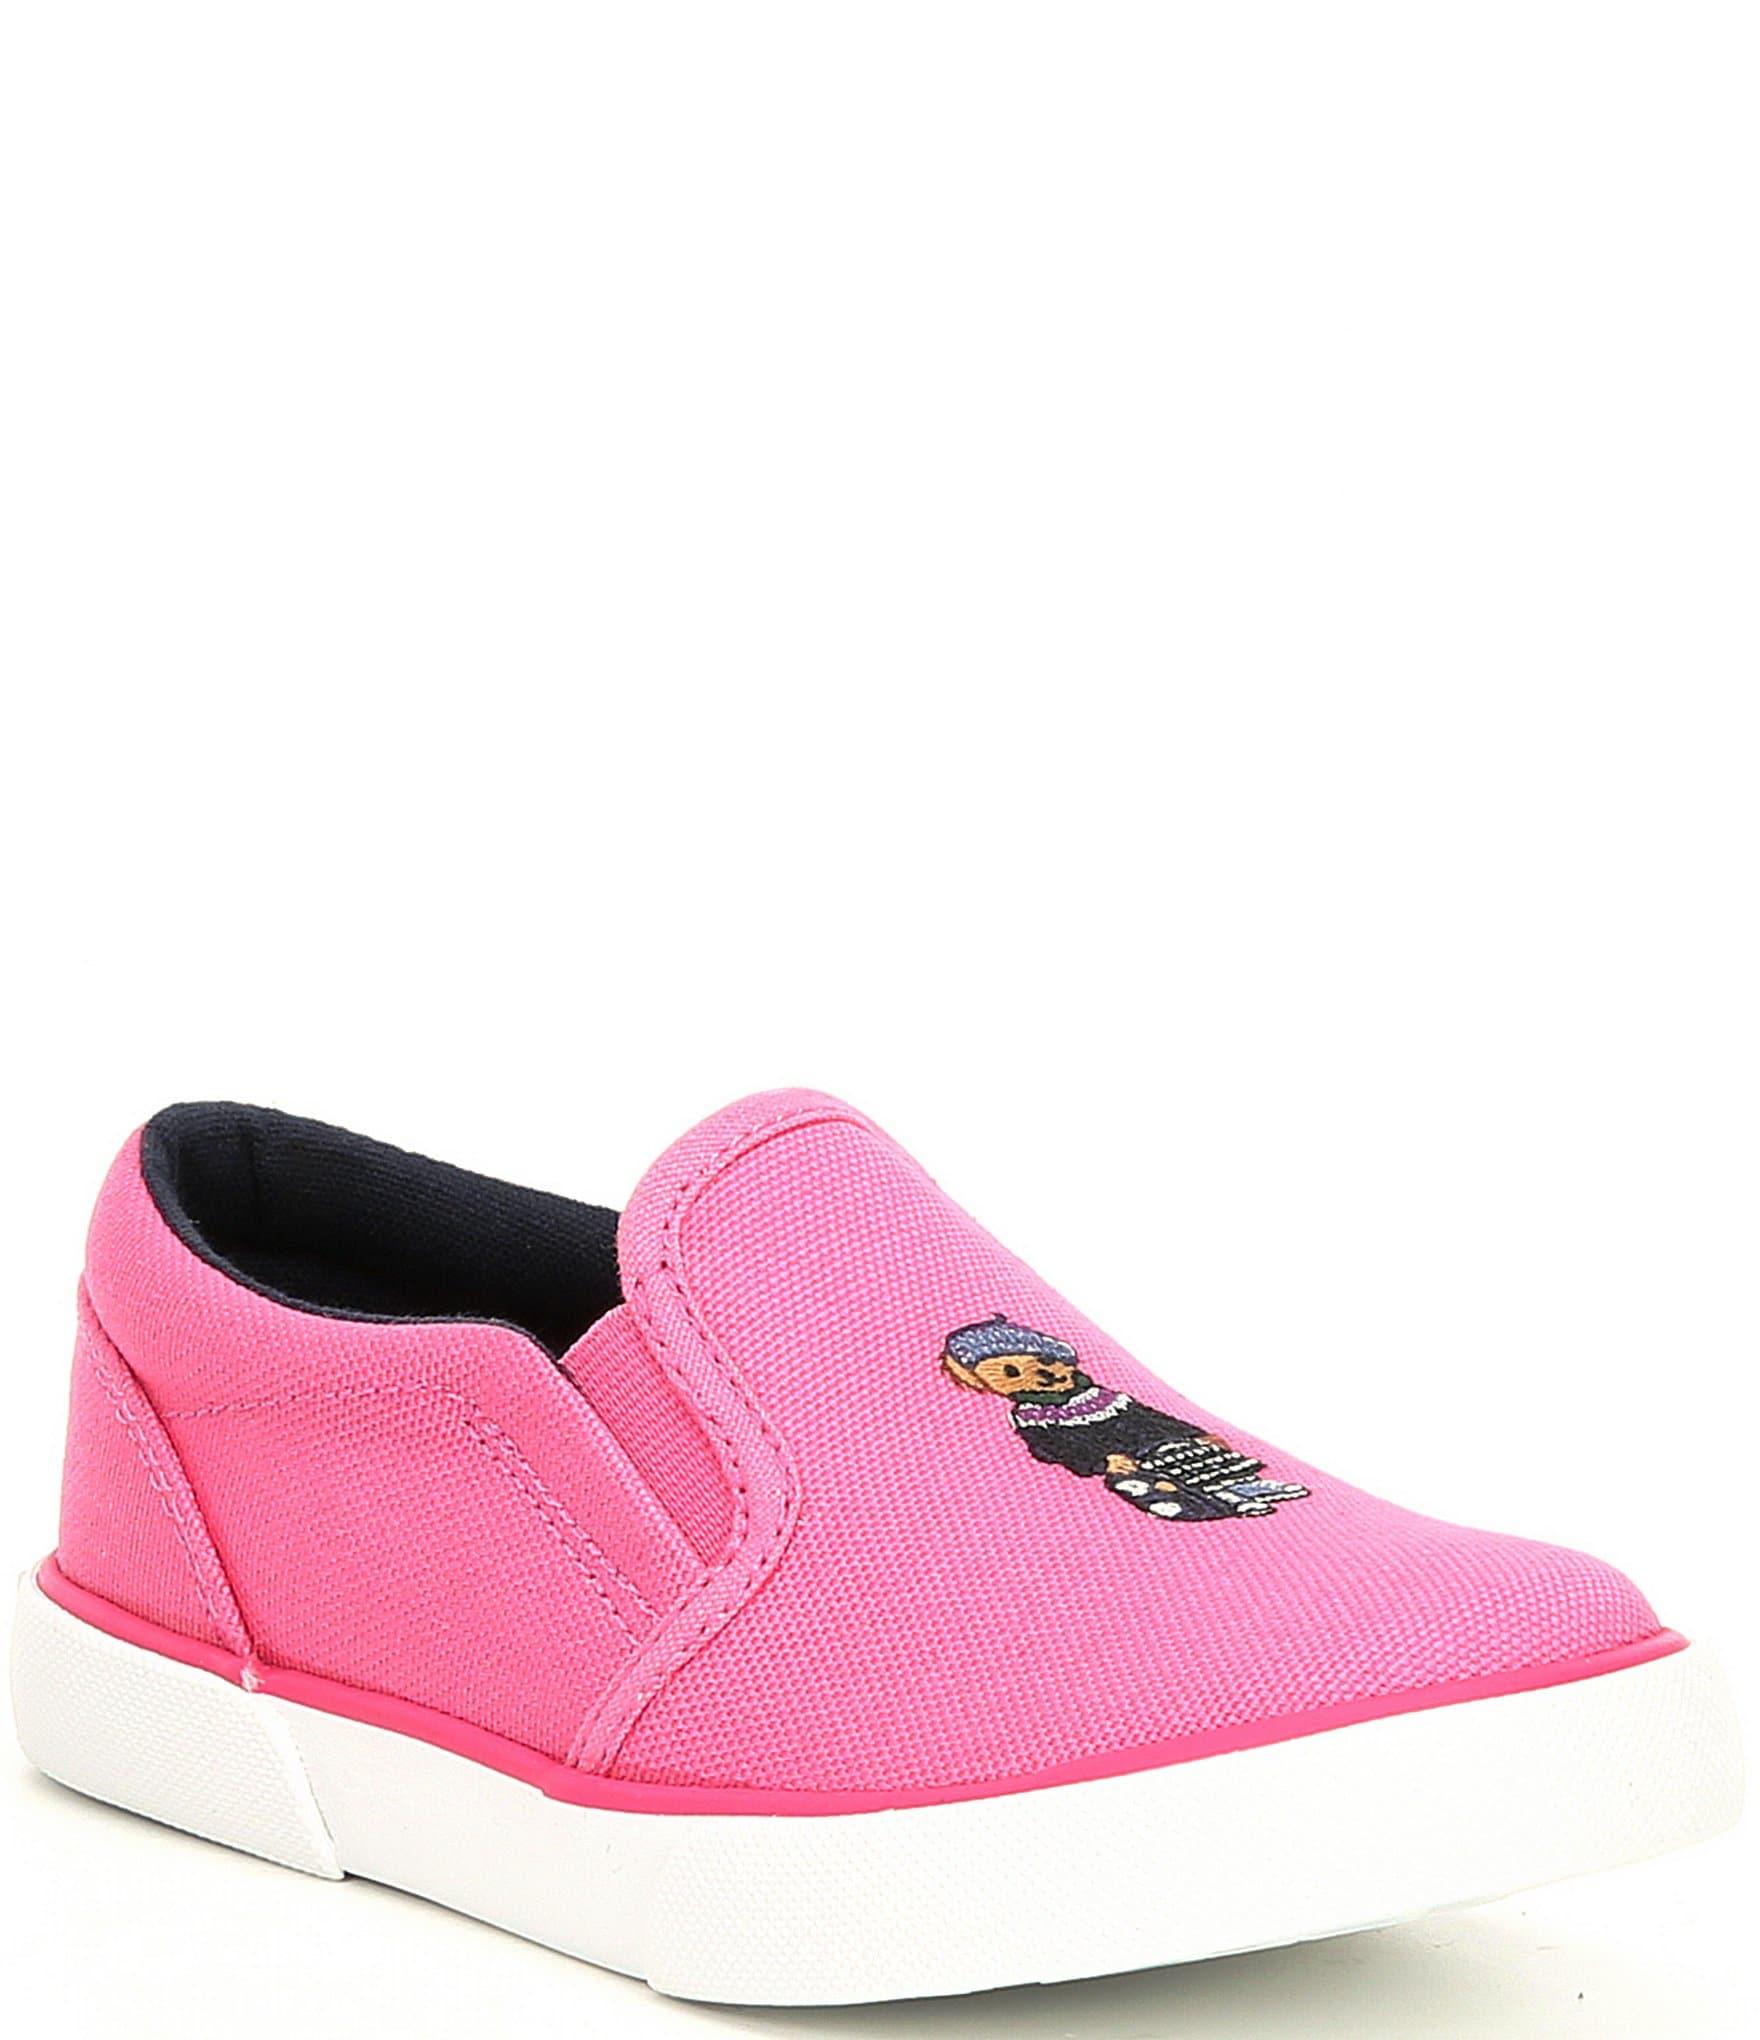 infant girl polo shoes